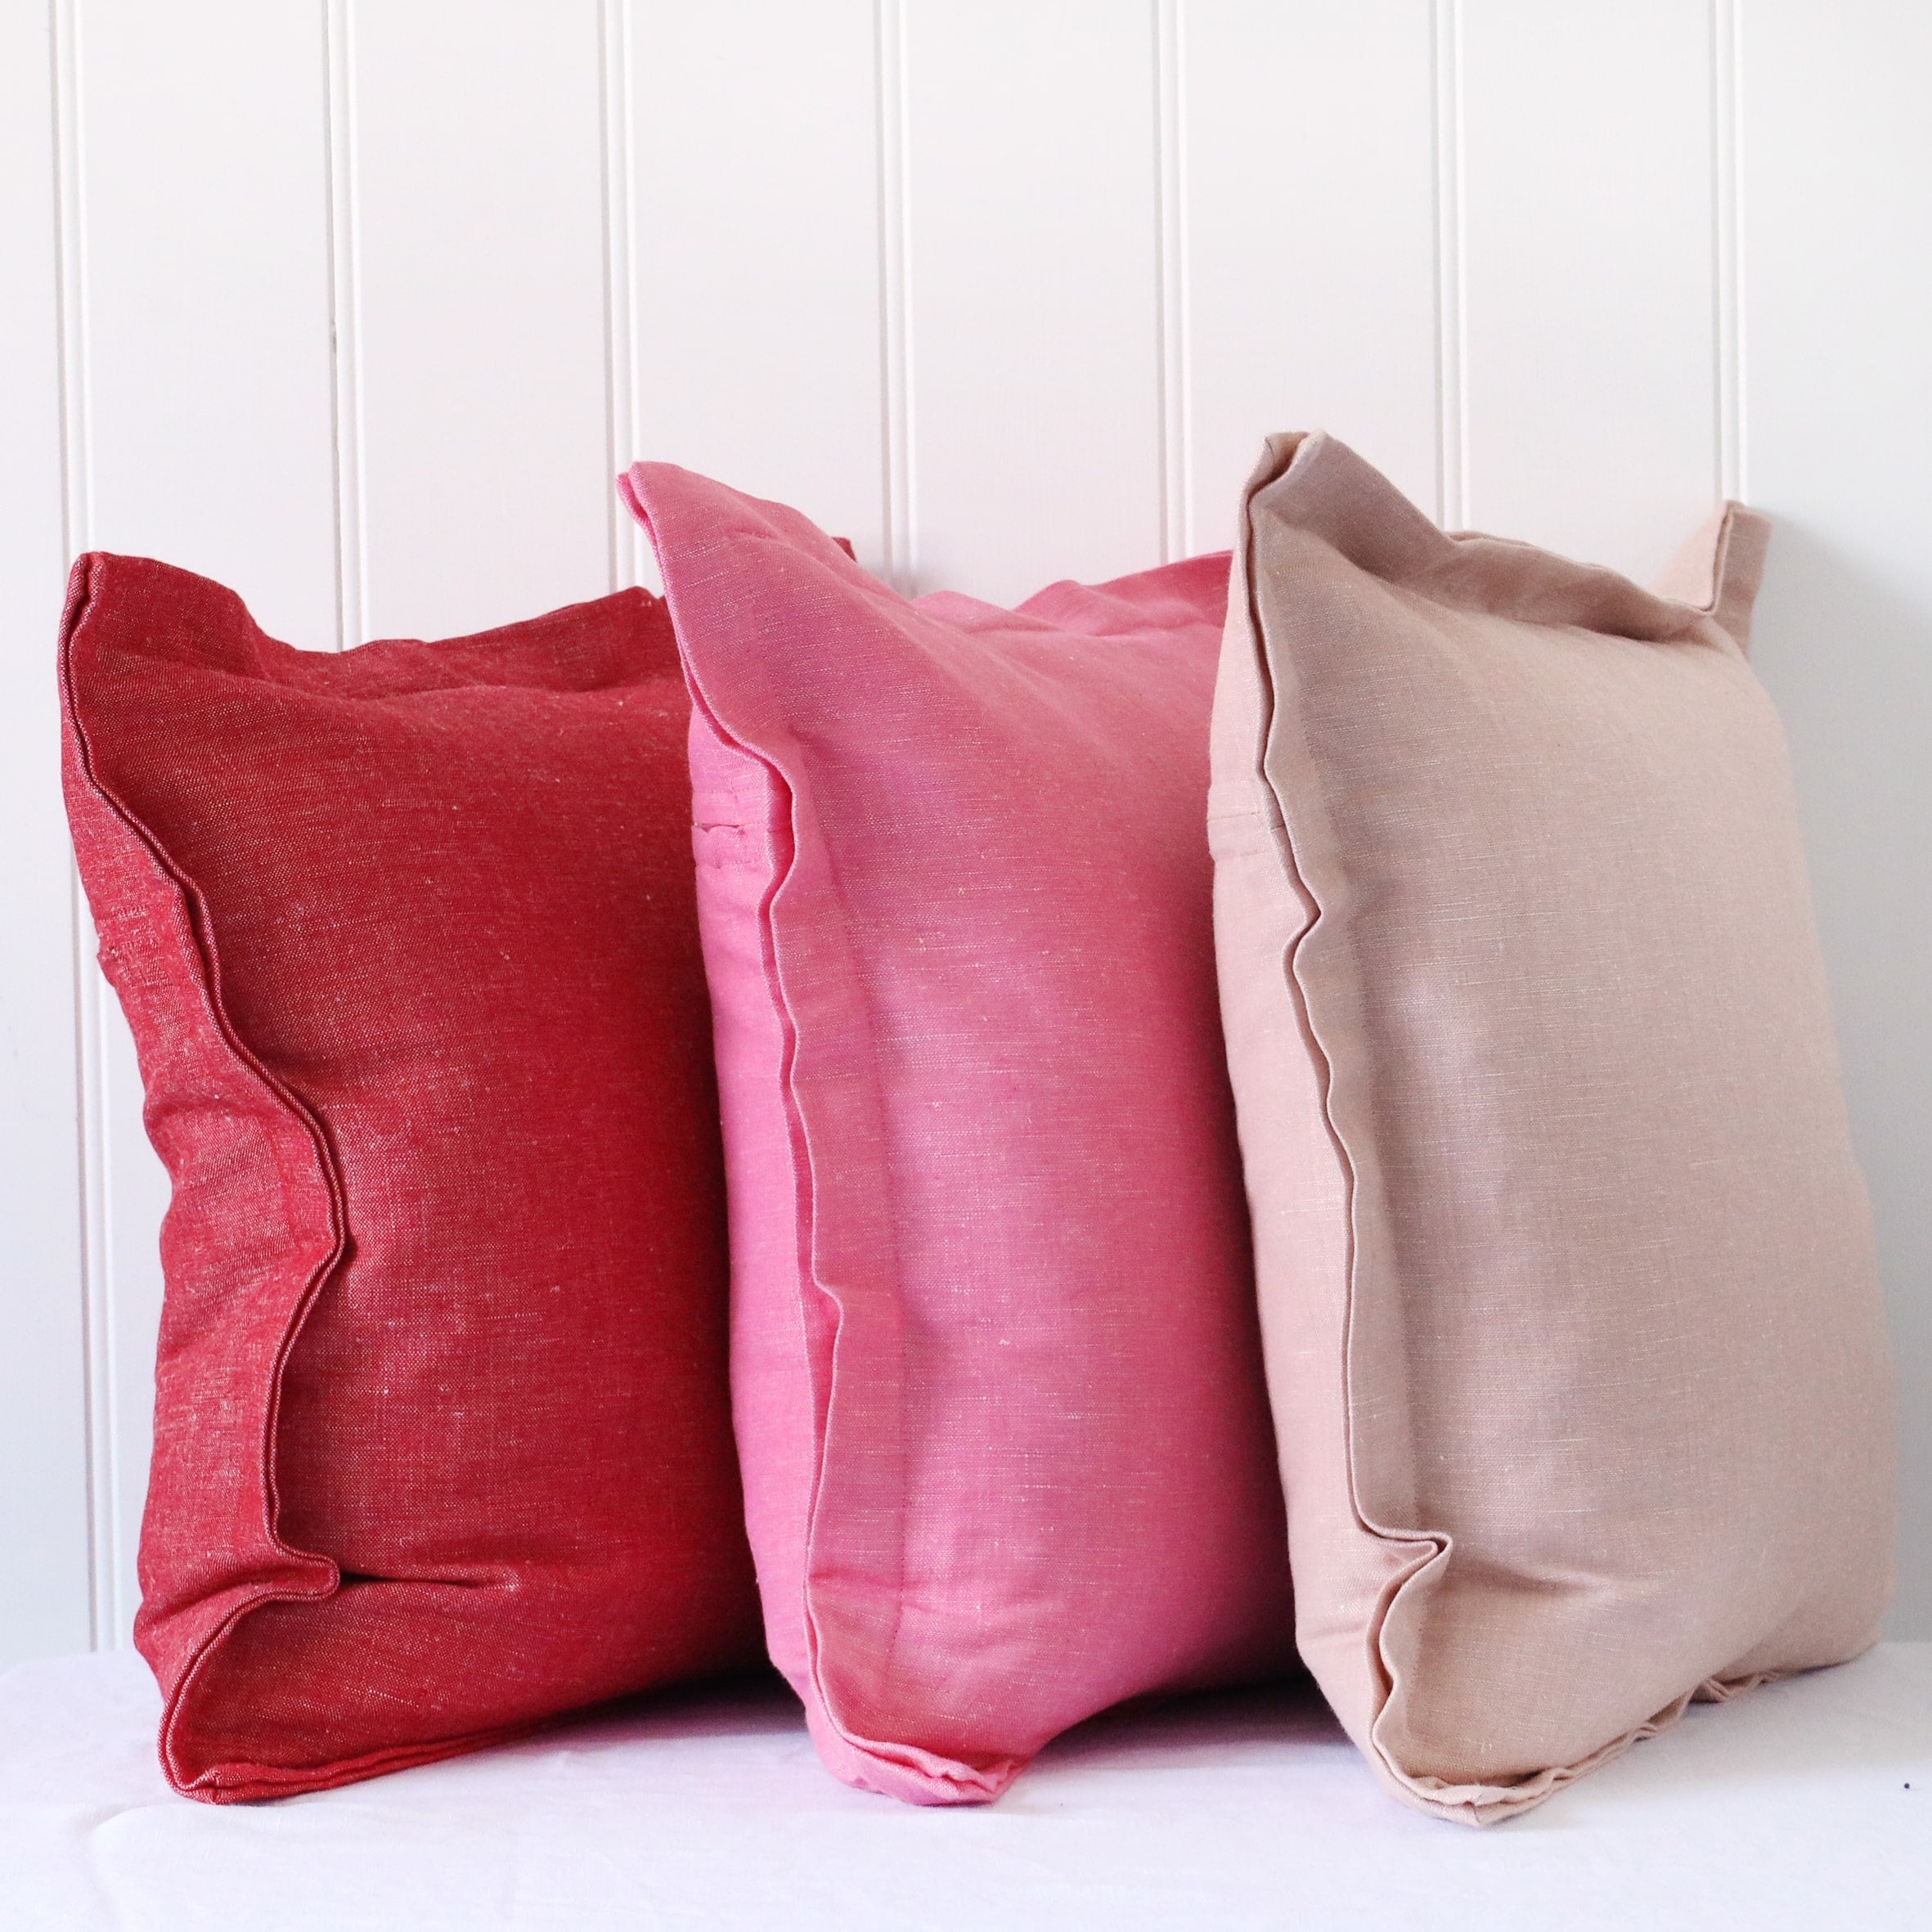 red, hot pink and soft pink chambray cushions with double flange in a pile on white background